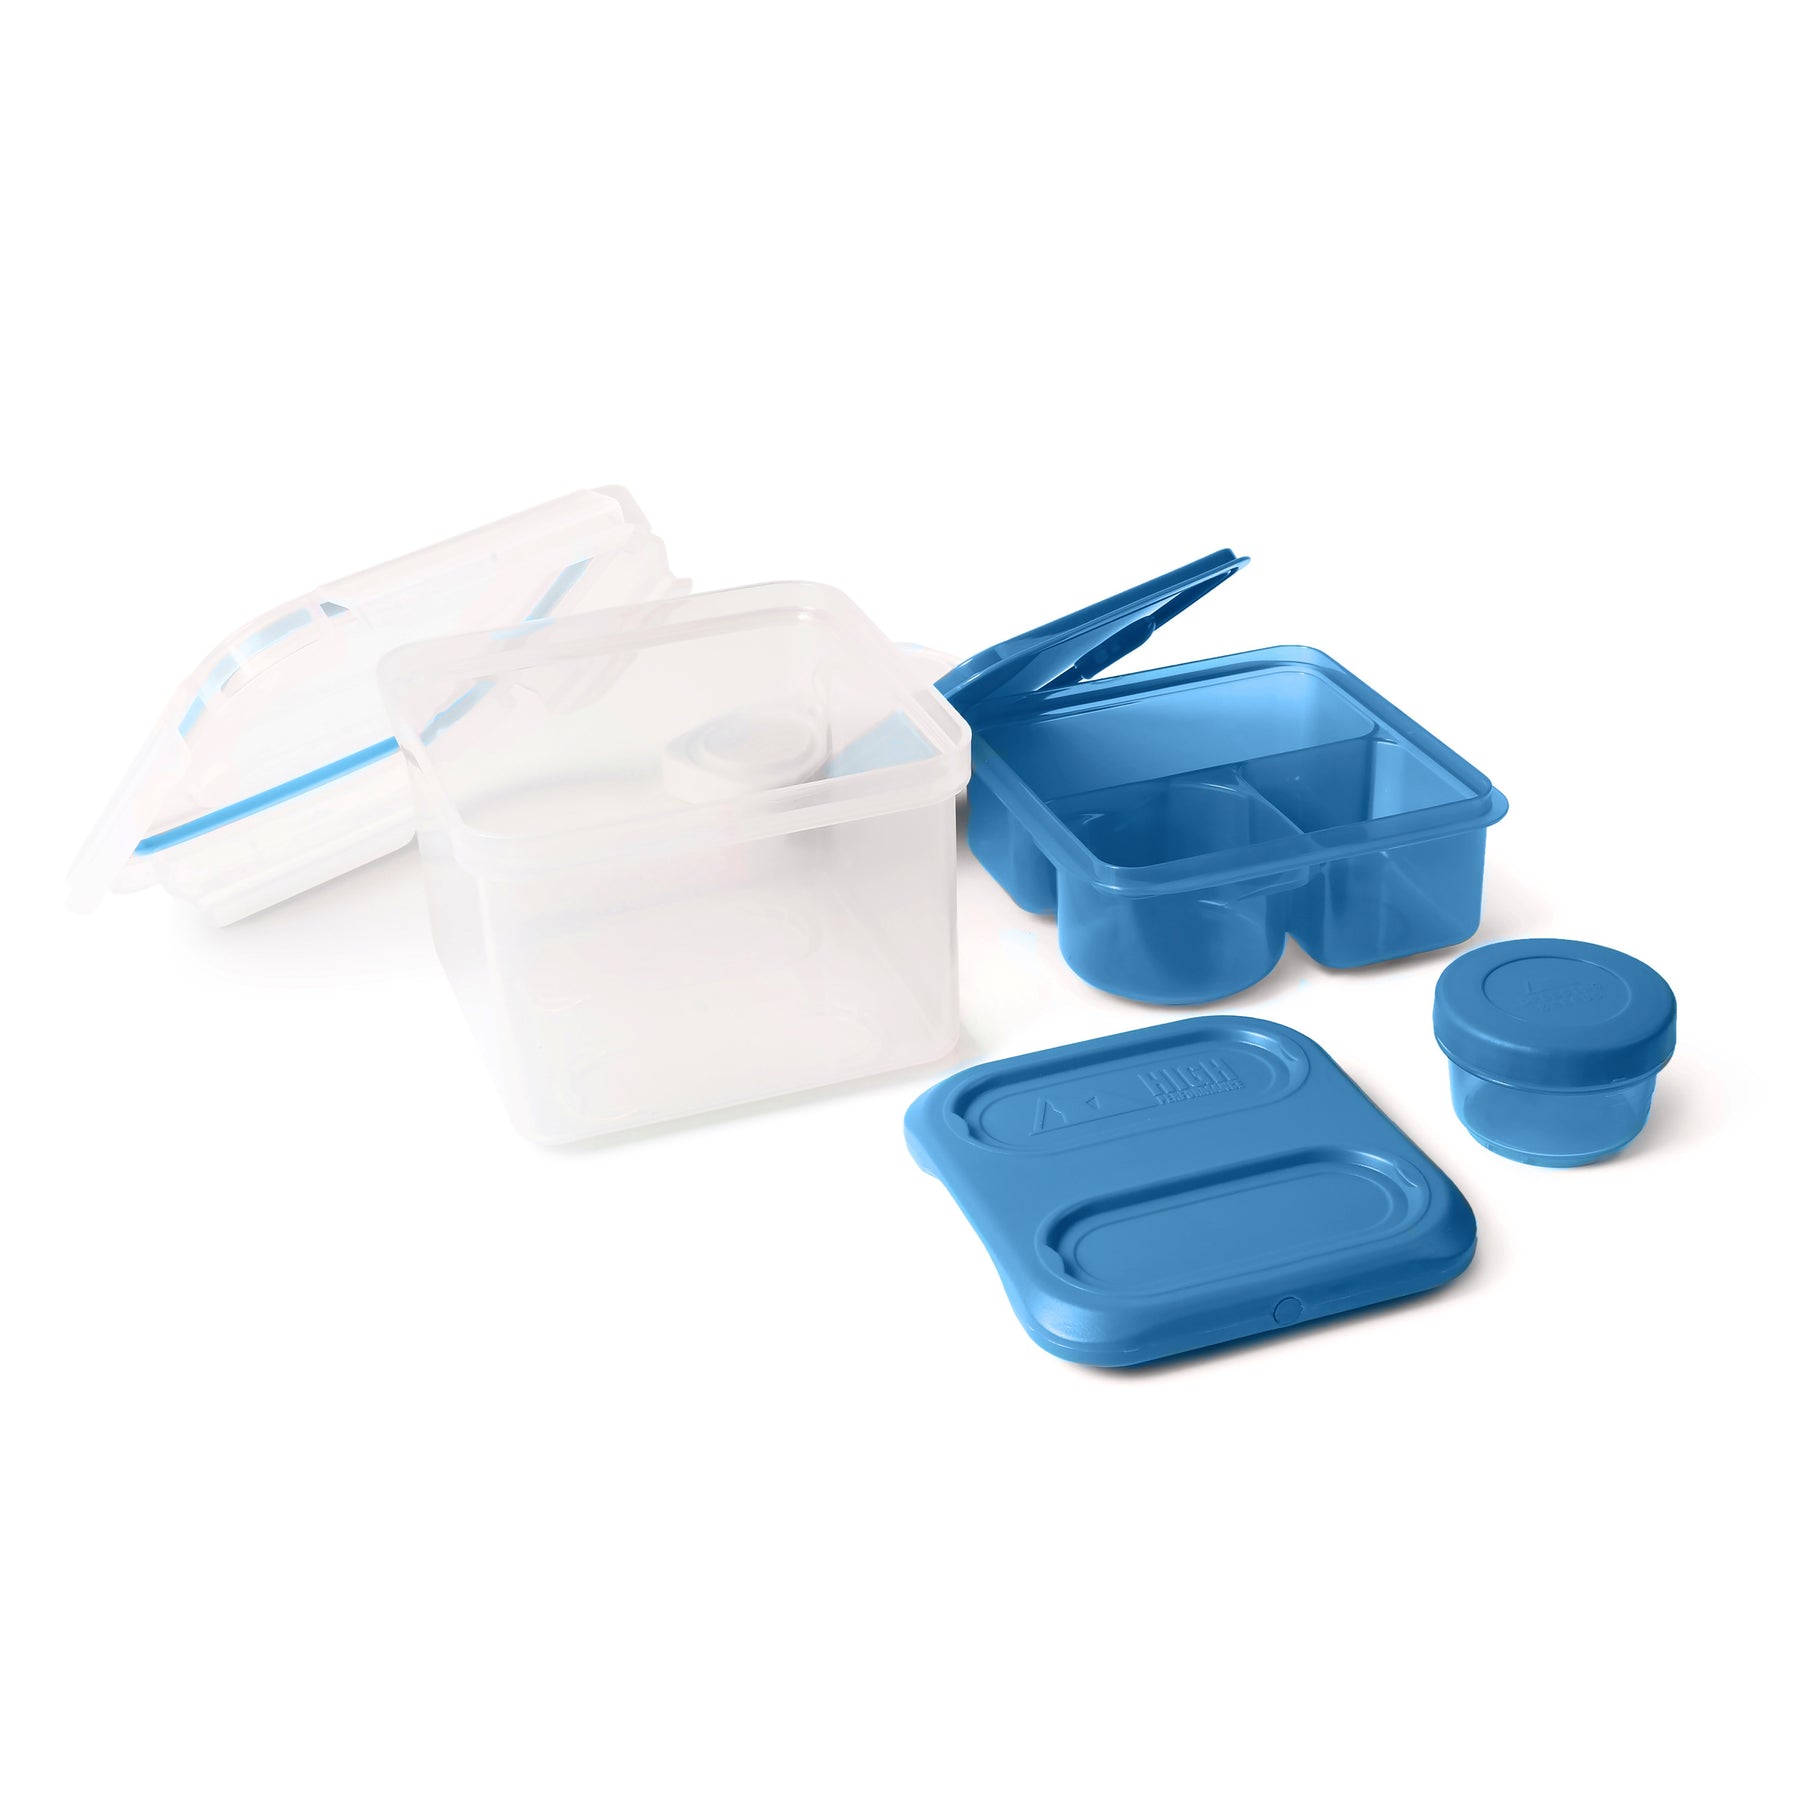 8 Piece All-in-One Entrée Set Navy by Arctic Zone